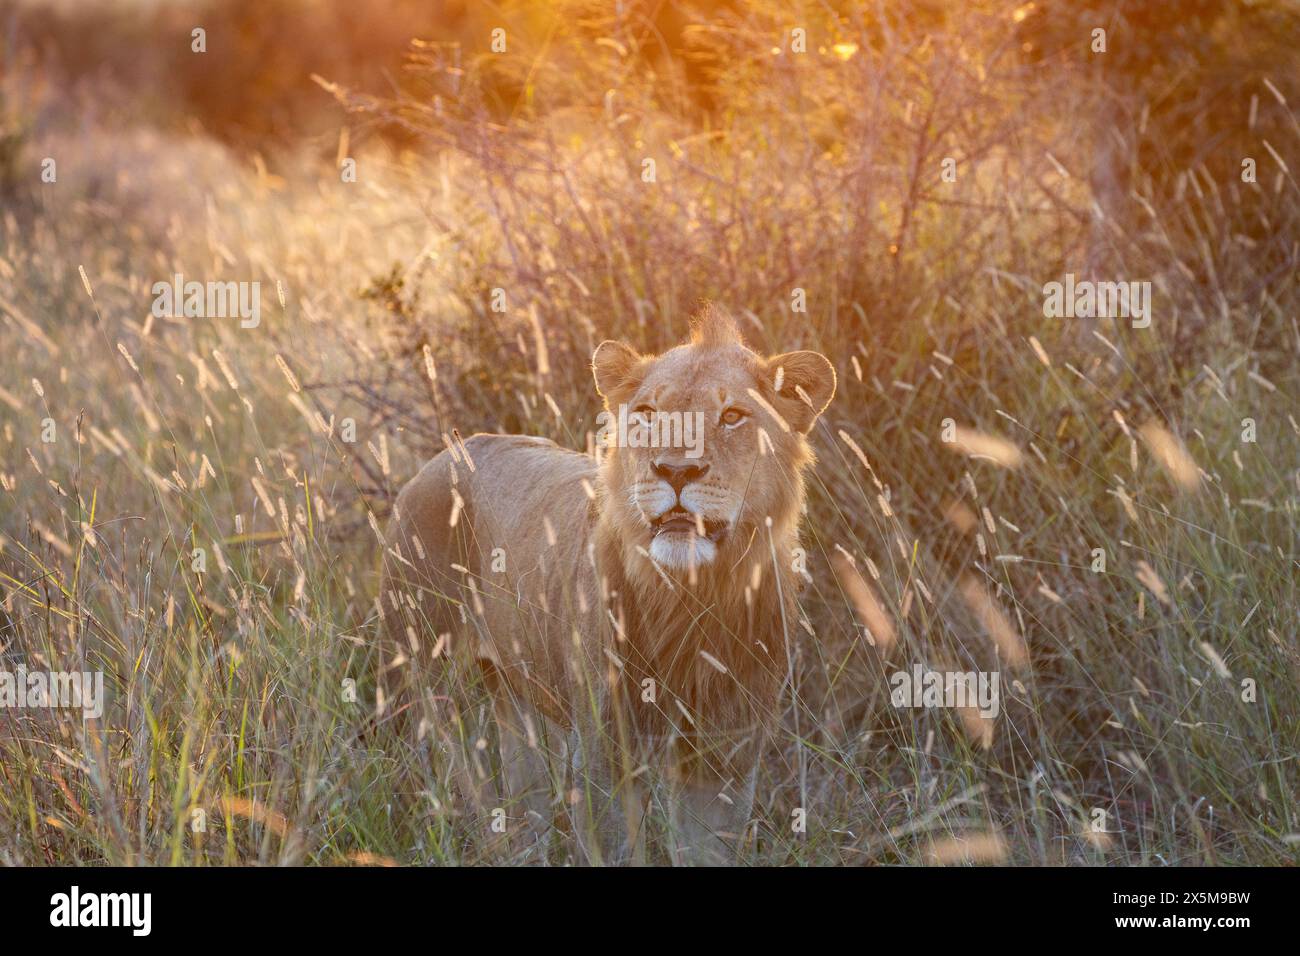 A young male lion, Panthera leo, standing in long grass, during sunset. Stock Photo